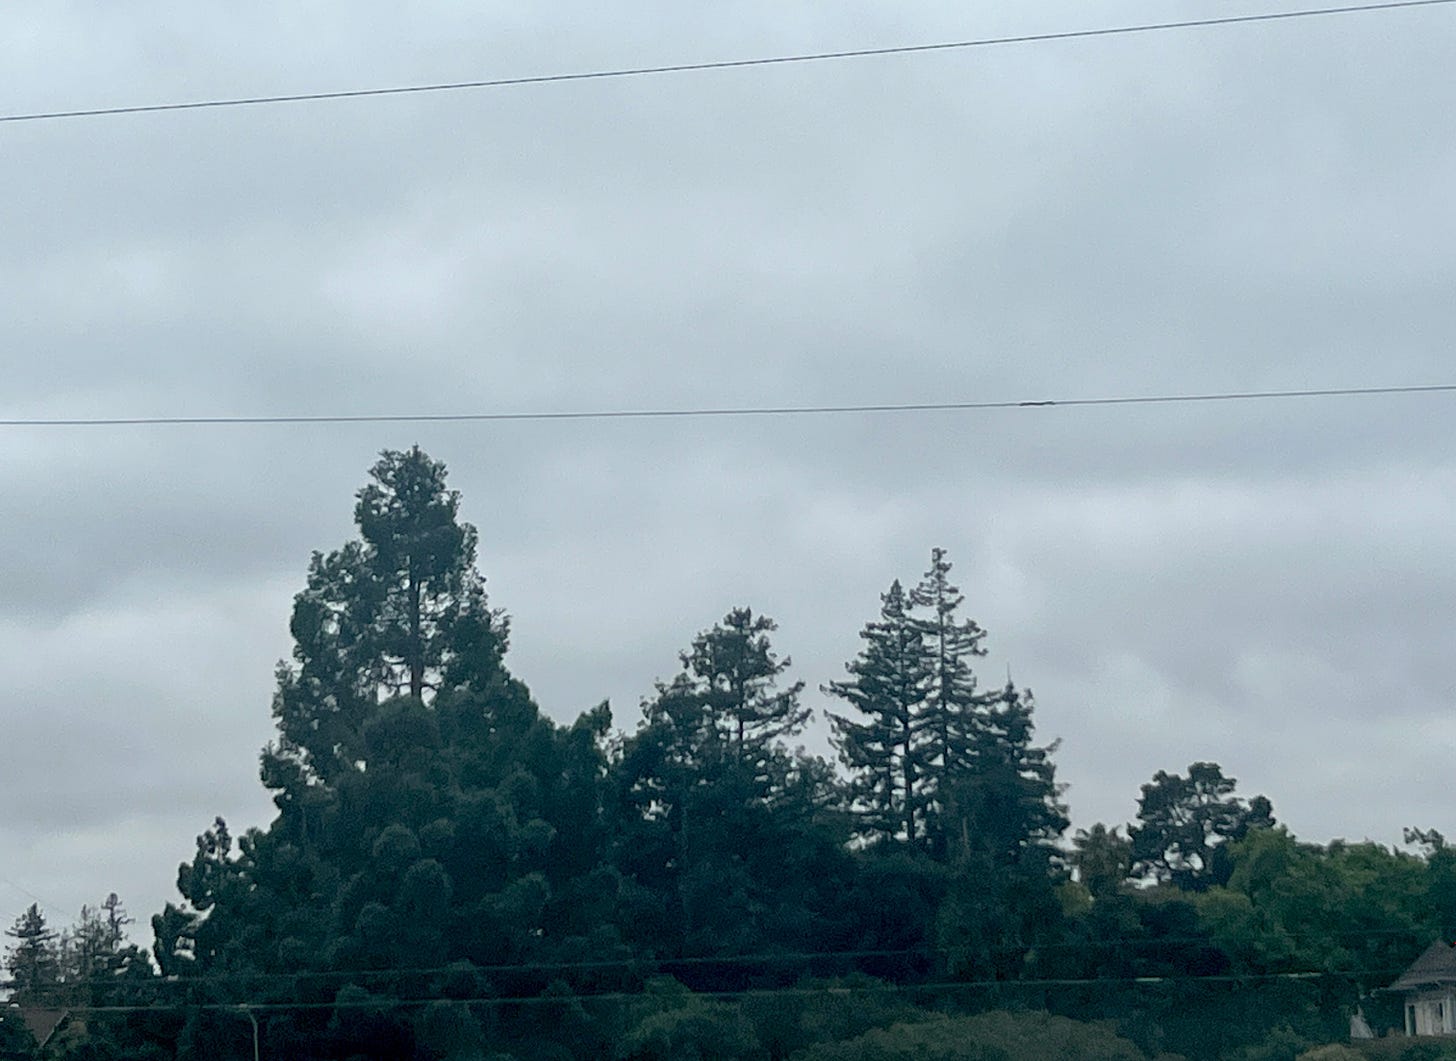 Silhouetted redwoods and oaks with an overcast sky